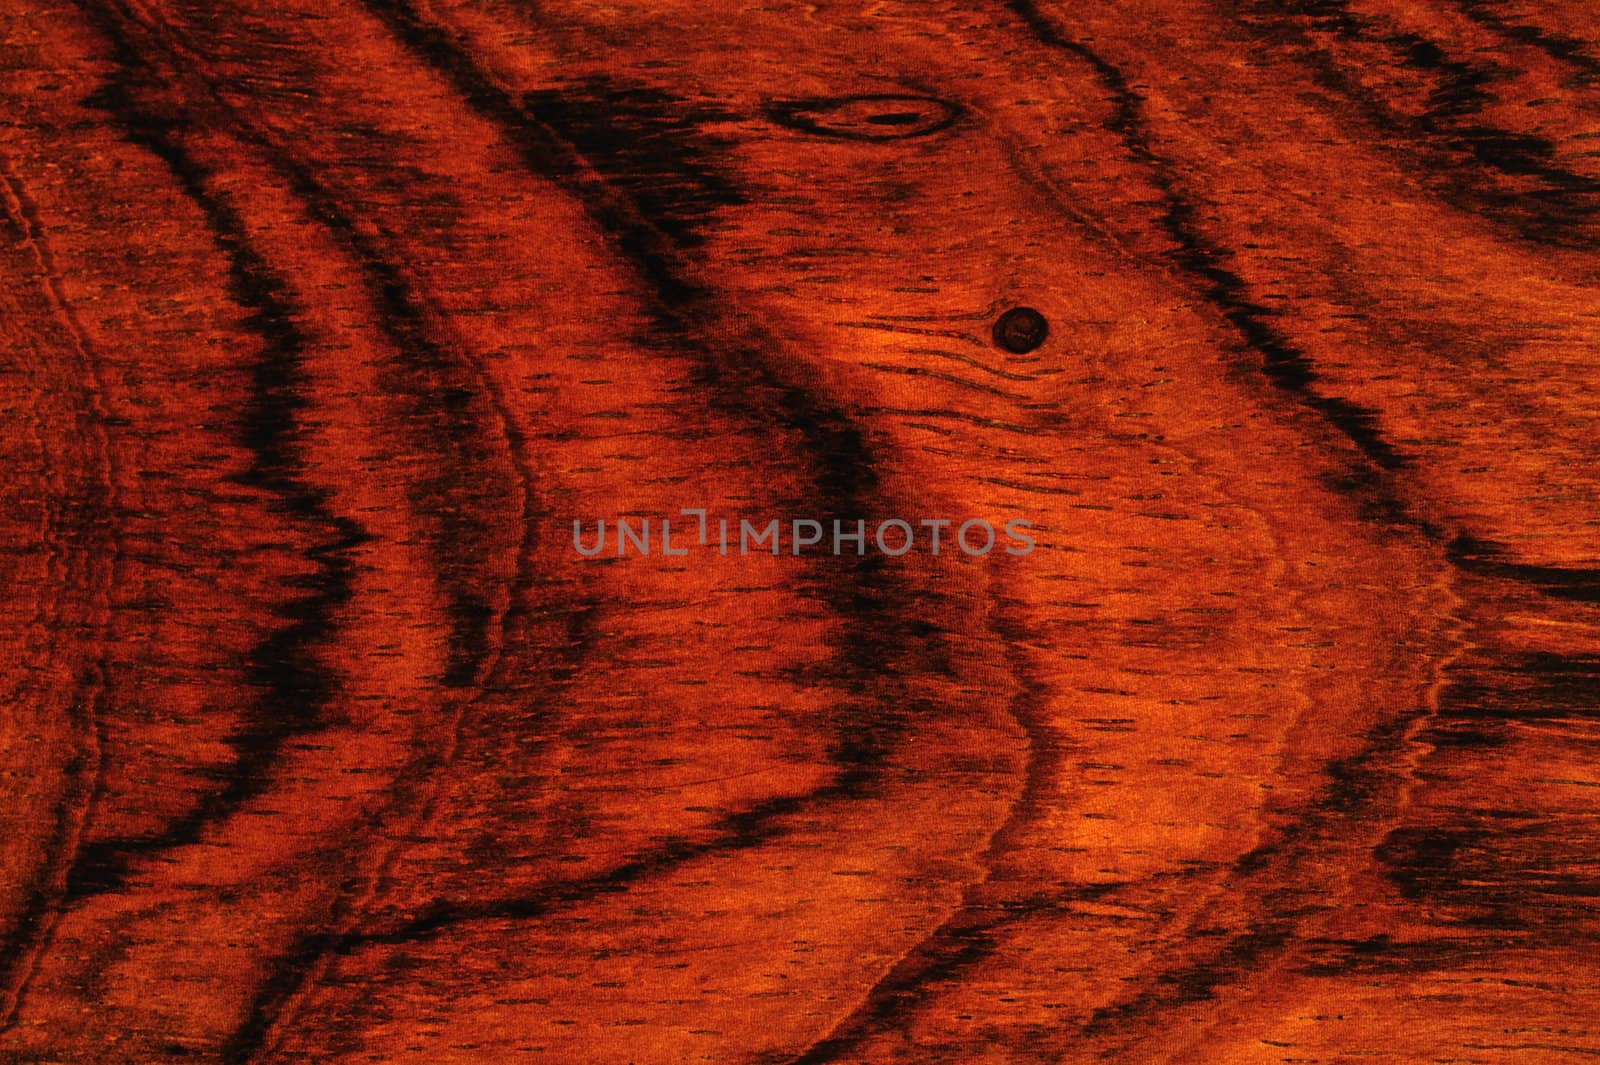 Macrophotograph of the grain of polished Jacaranda wood. Suitable as a natural abstract background.